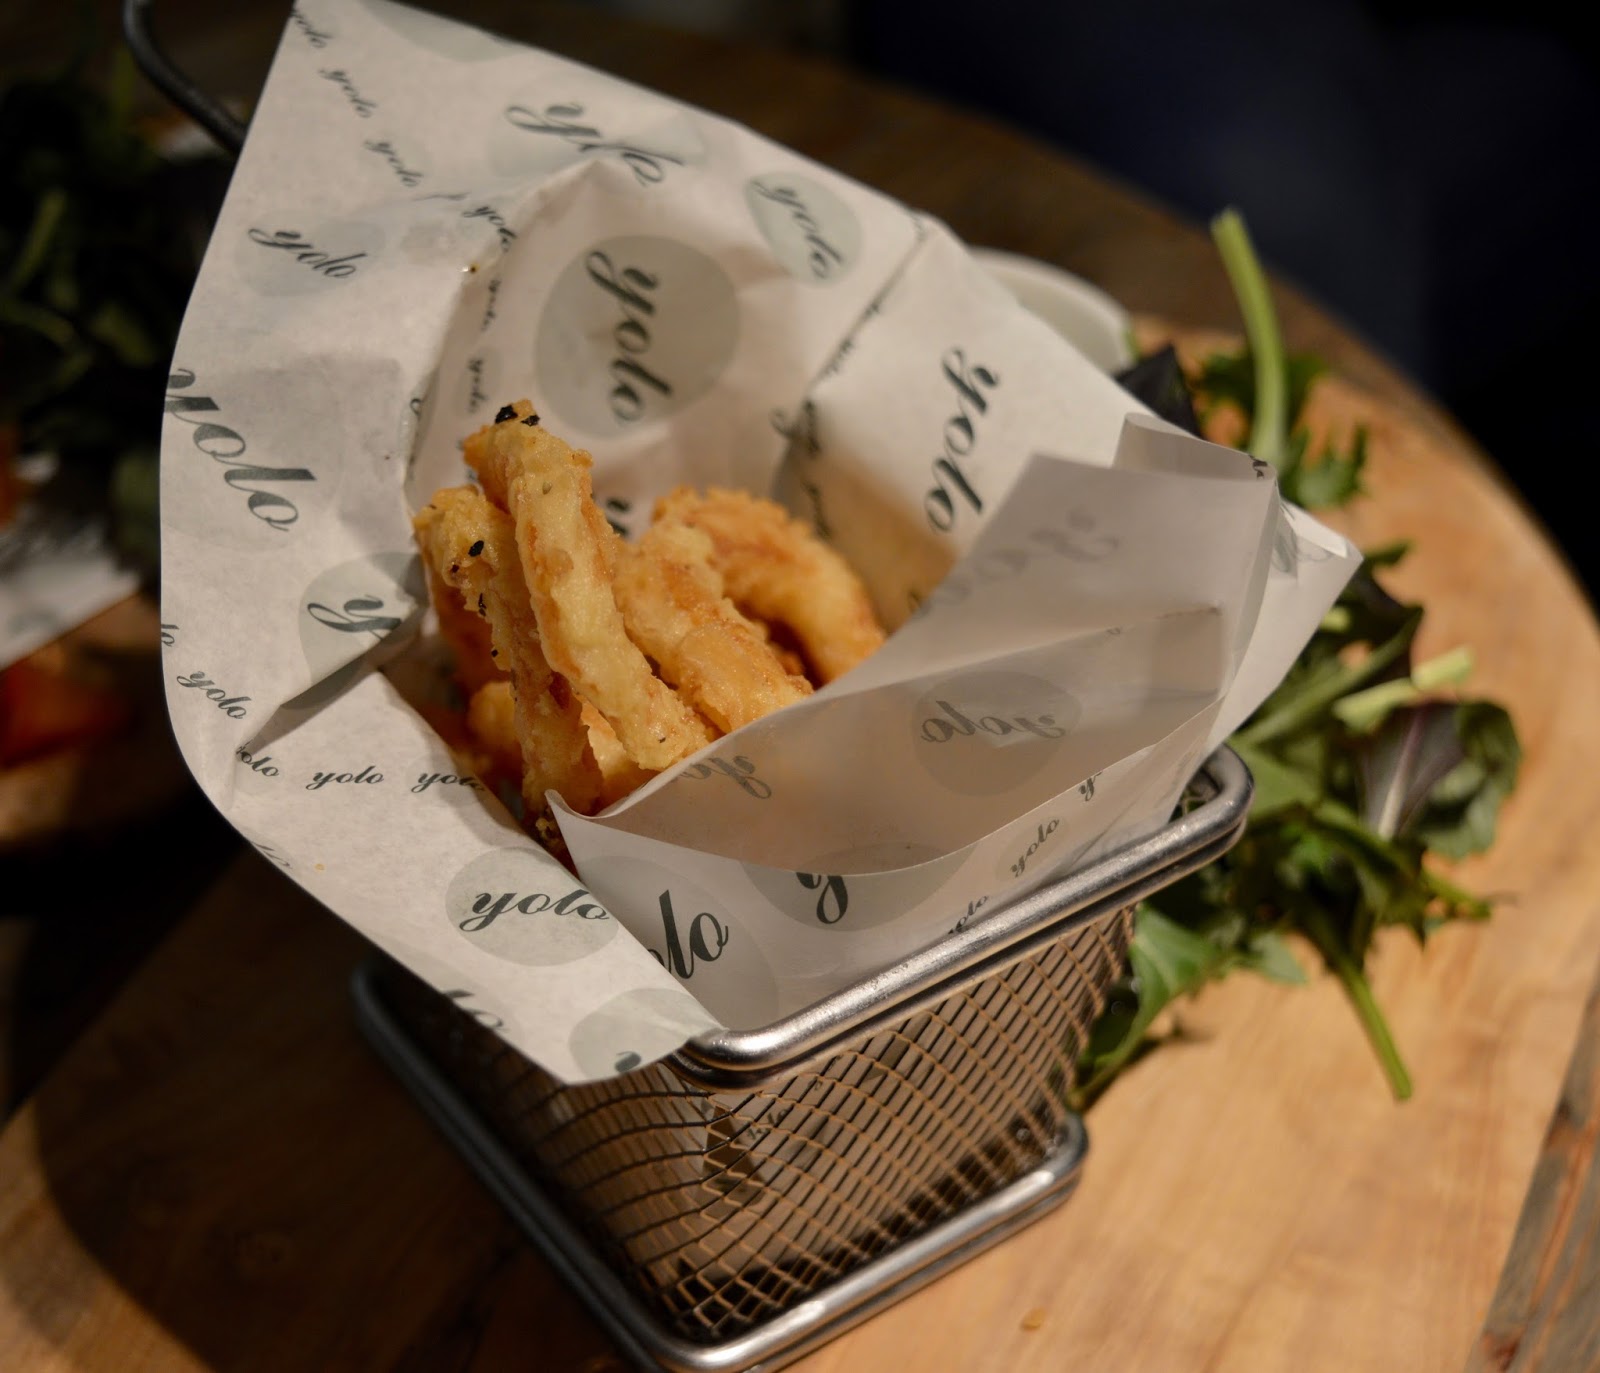 Yolo Townhouse Newcastle | A new venue to try for your next girl's night out - calamari